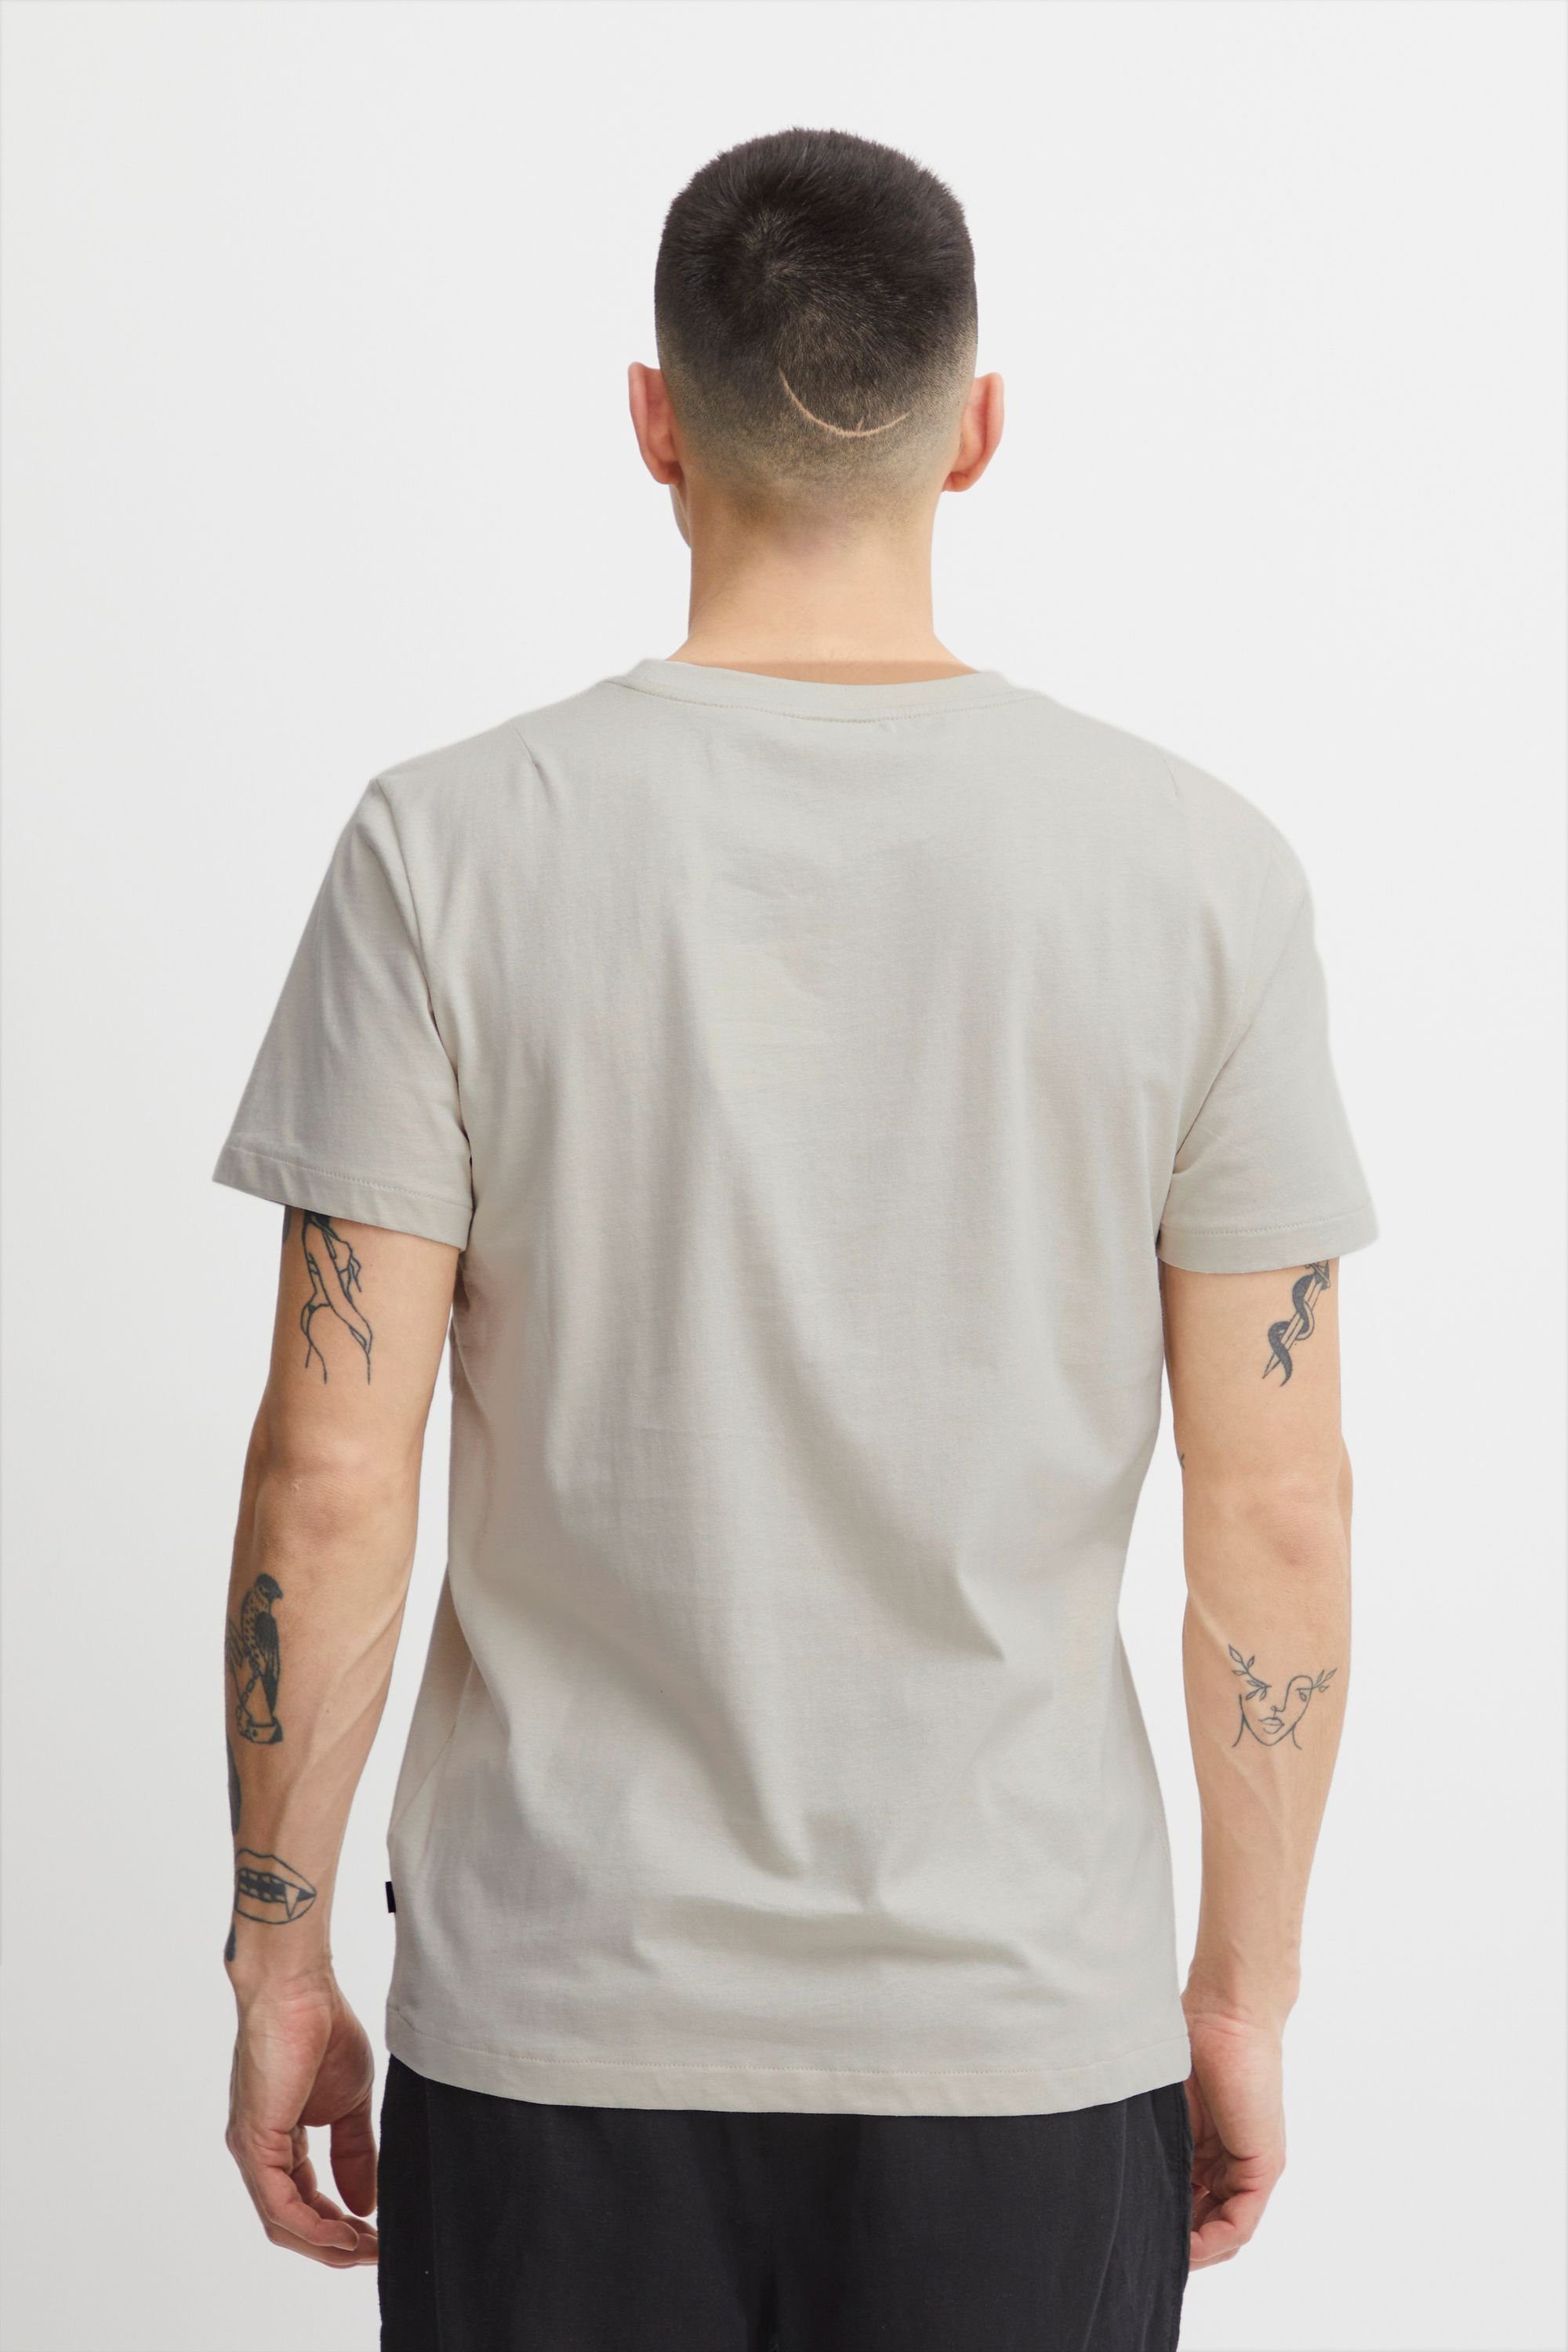 - (130401) OATMEAL T-Shirt 21107531 !Solid SDElwell